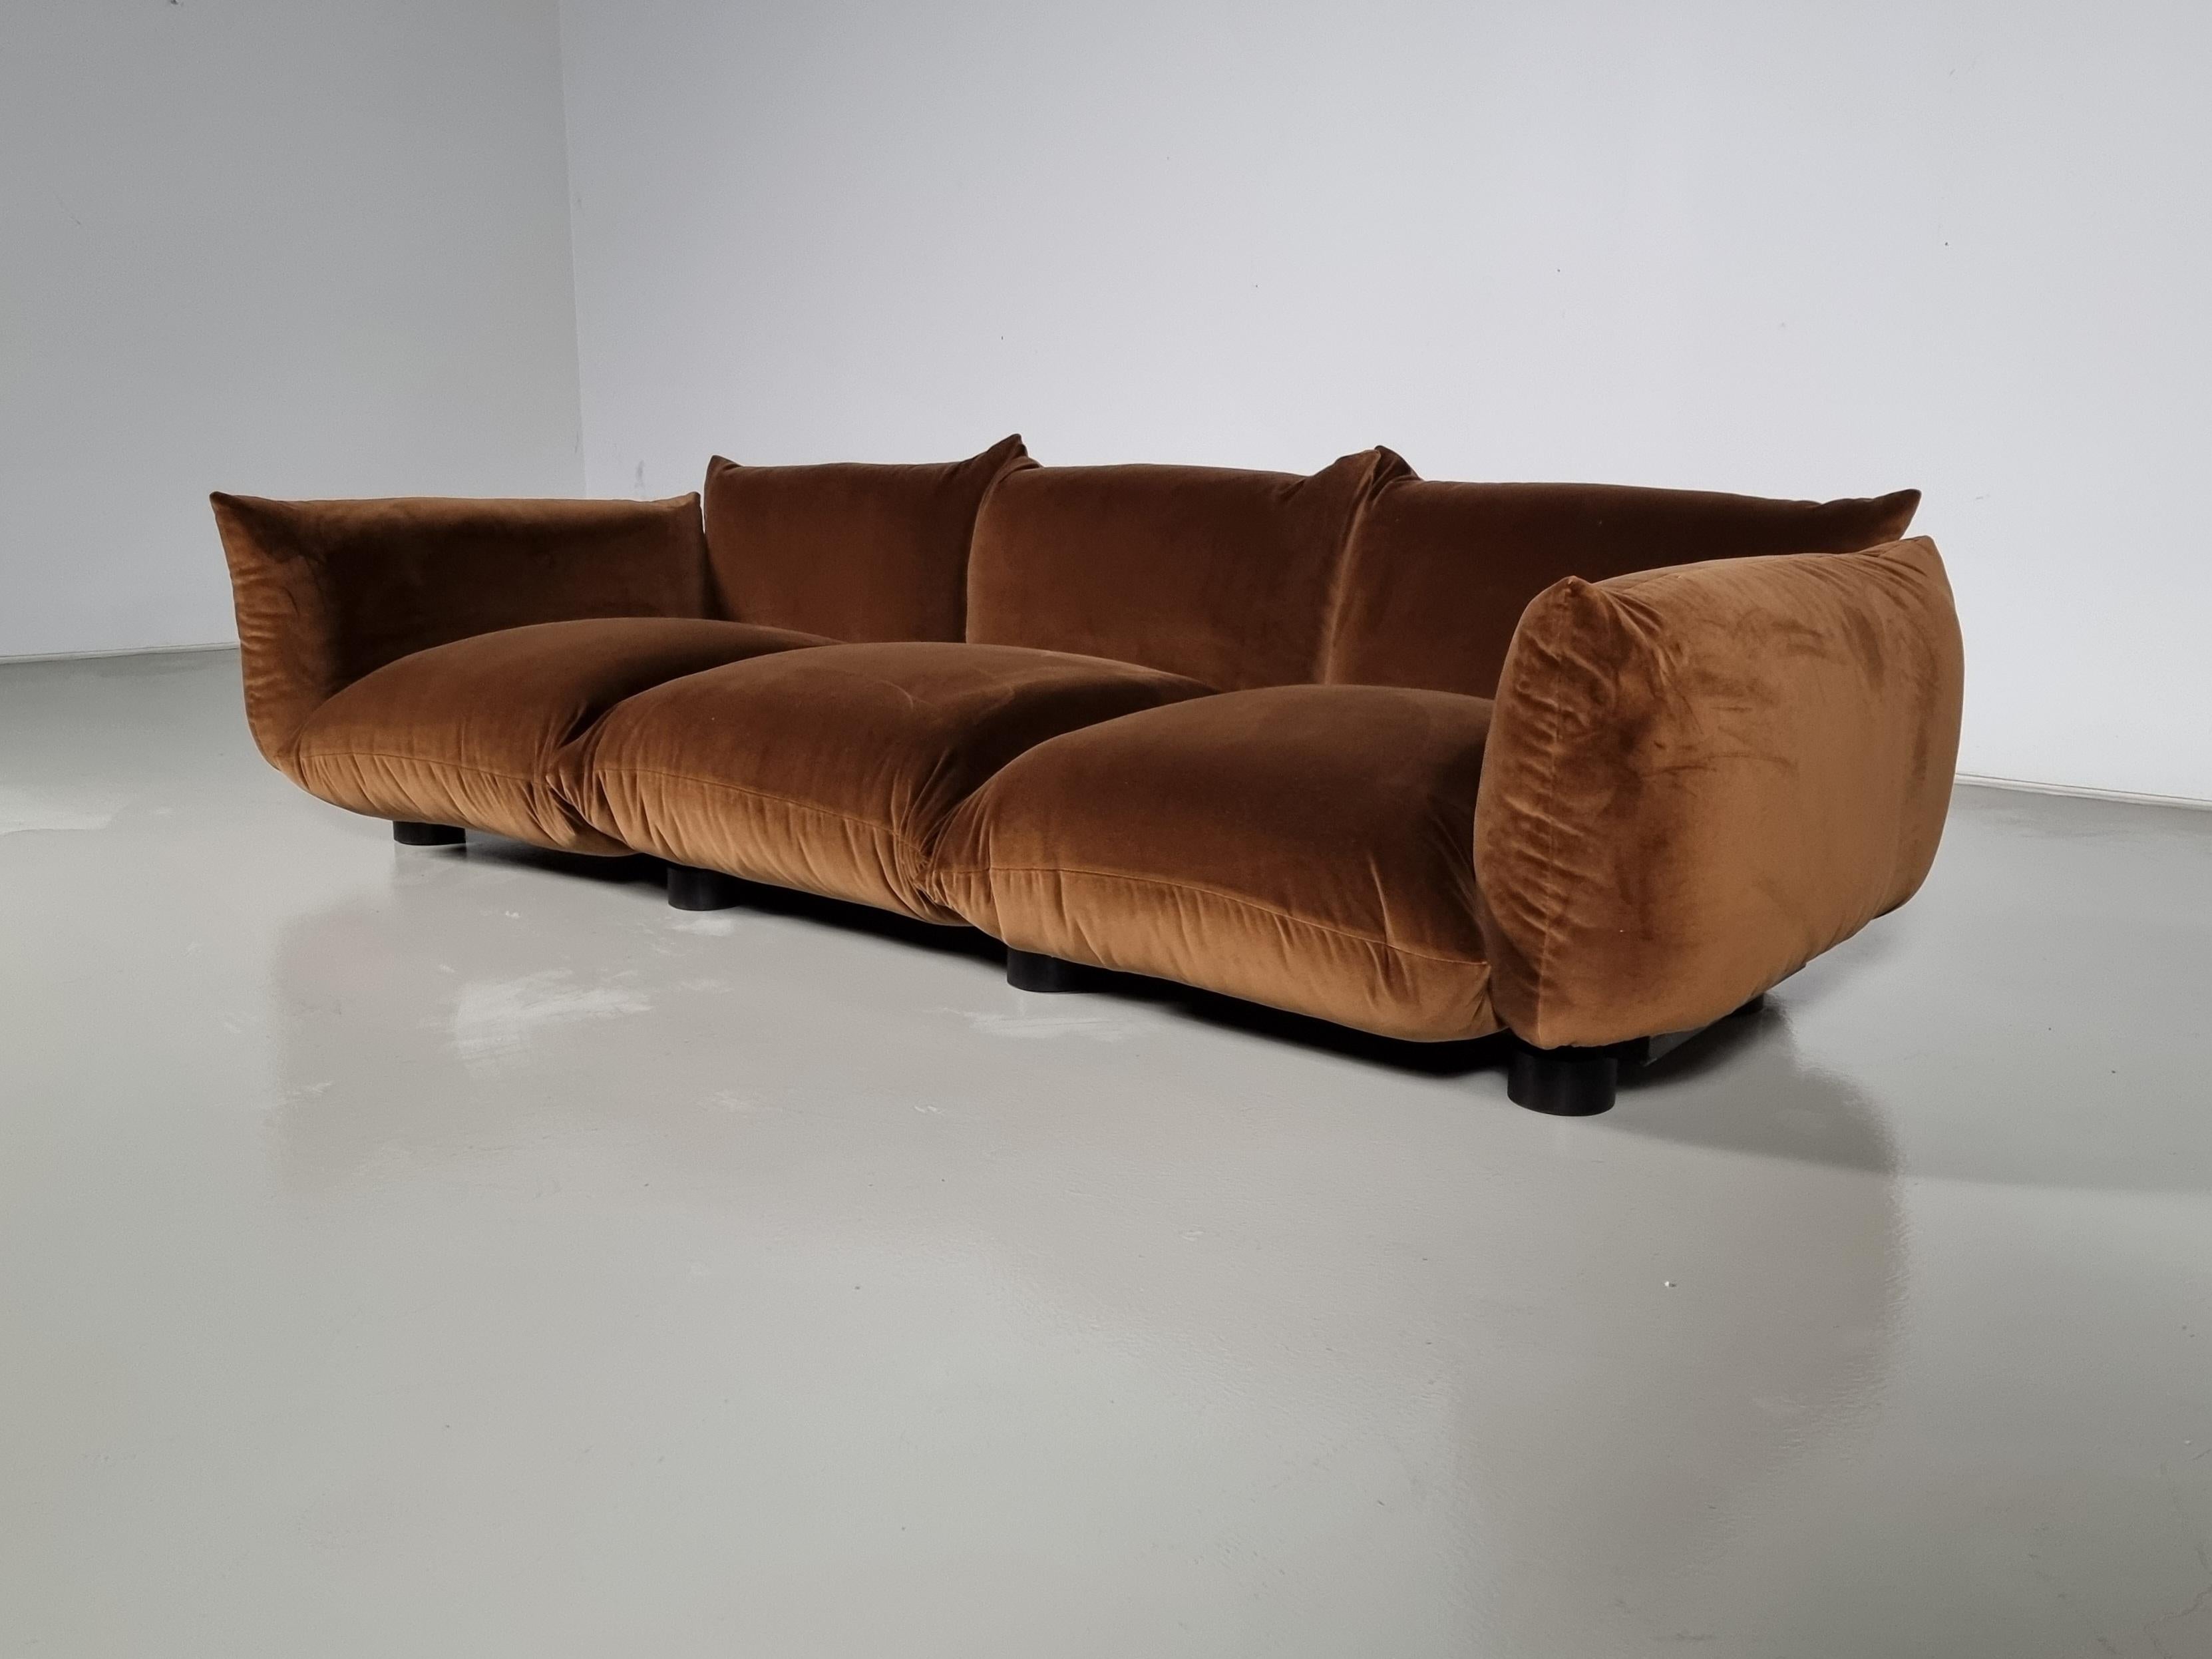 Mario Marenco for Arflex, 'Marenco' sofa, velvet, Italy, 1970

This Marenco sofa is designed by Mario Marenco for Arflex. This sofa features a system with making the armrest and seats the base portion. There is a metal tubular frame facilitated